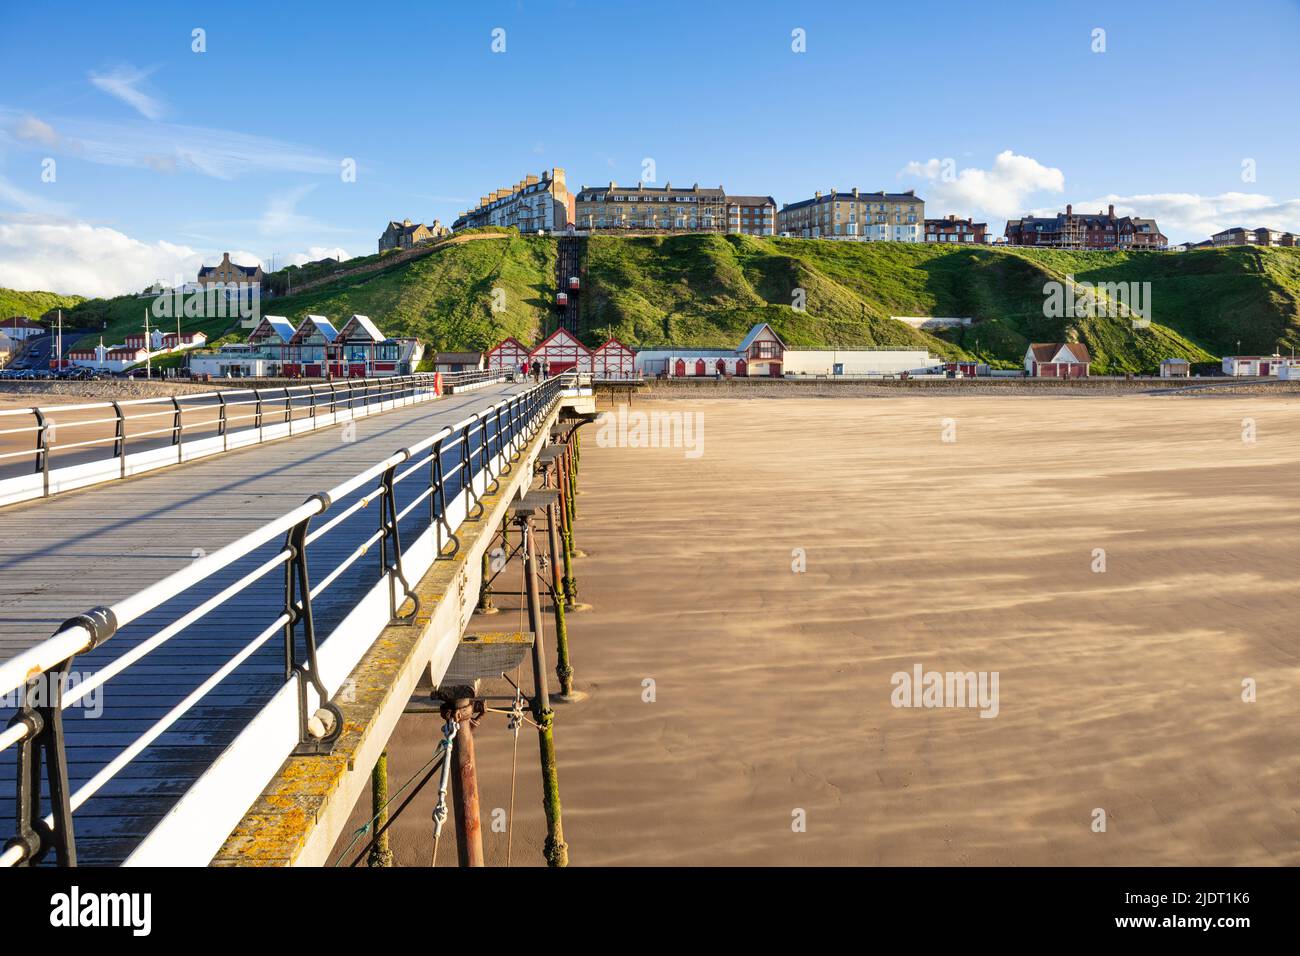 Saltburn by the sea yorkshire england Saltburn pier victorian pier and sandy beach saltburn town redcar cleveland North Yorkshire England UK GB Europe Stock Photo